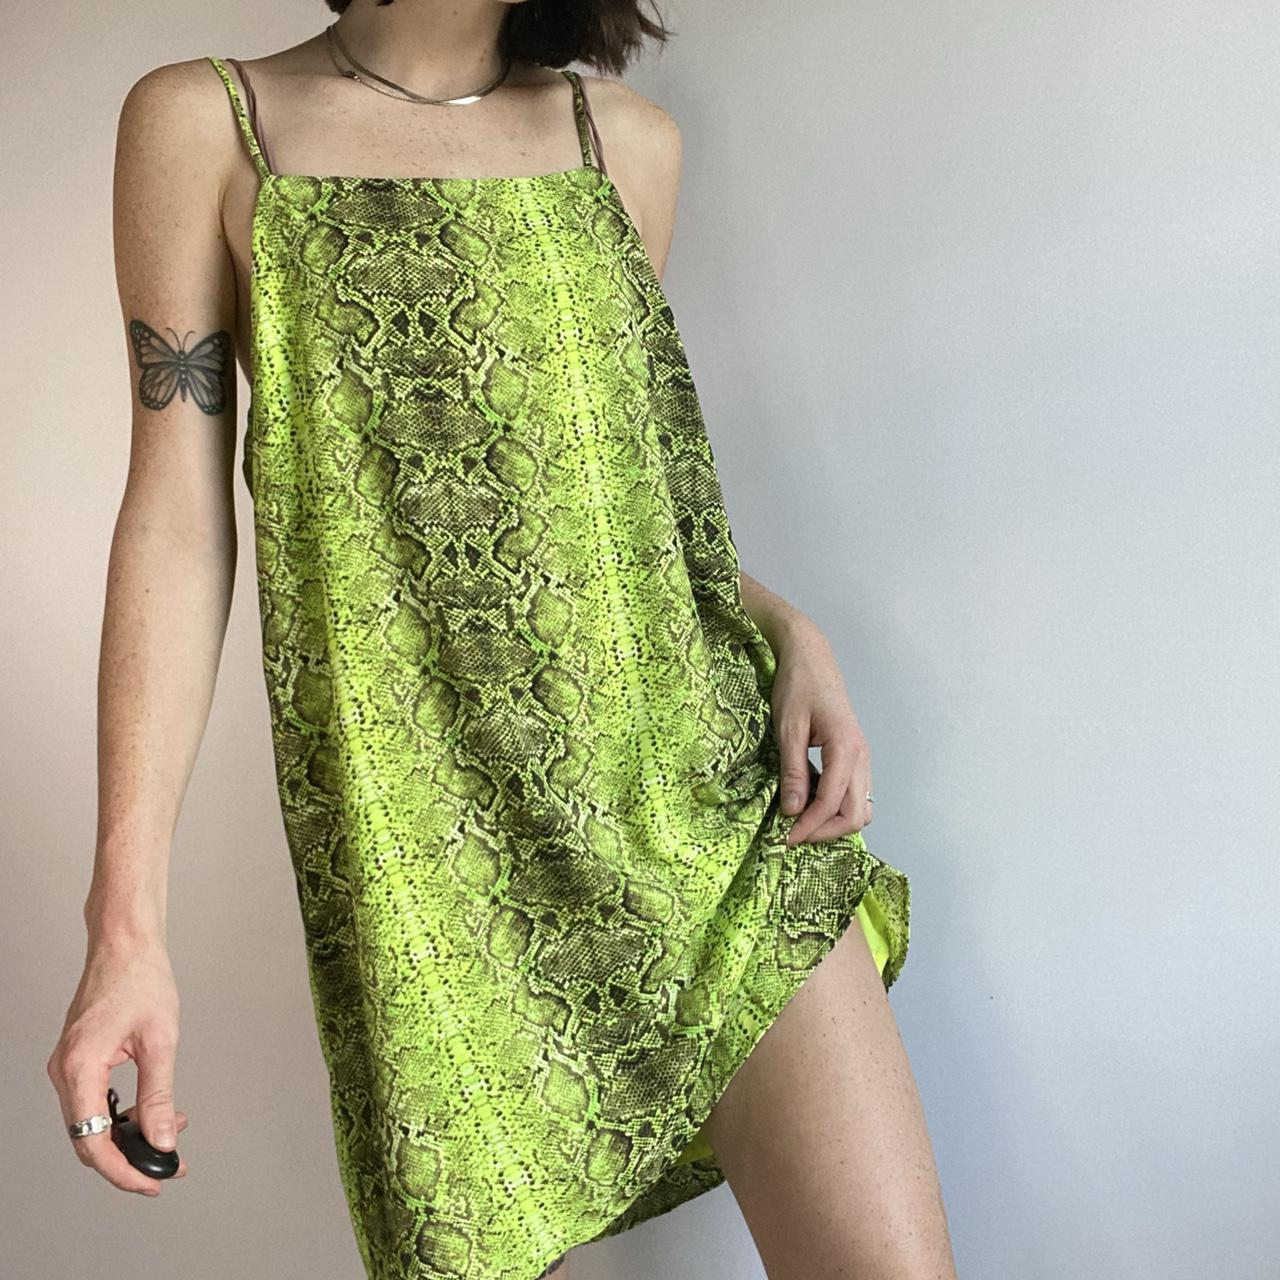 Product Image 2 - Lime Green snake print Dress

Size